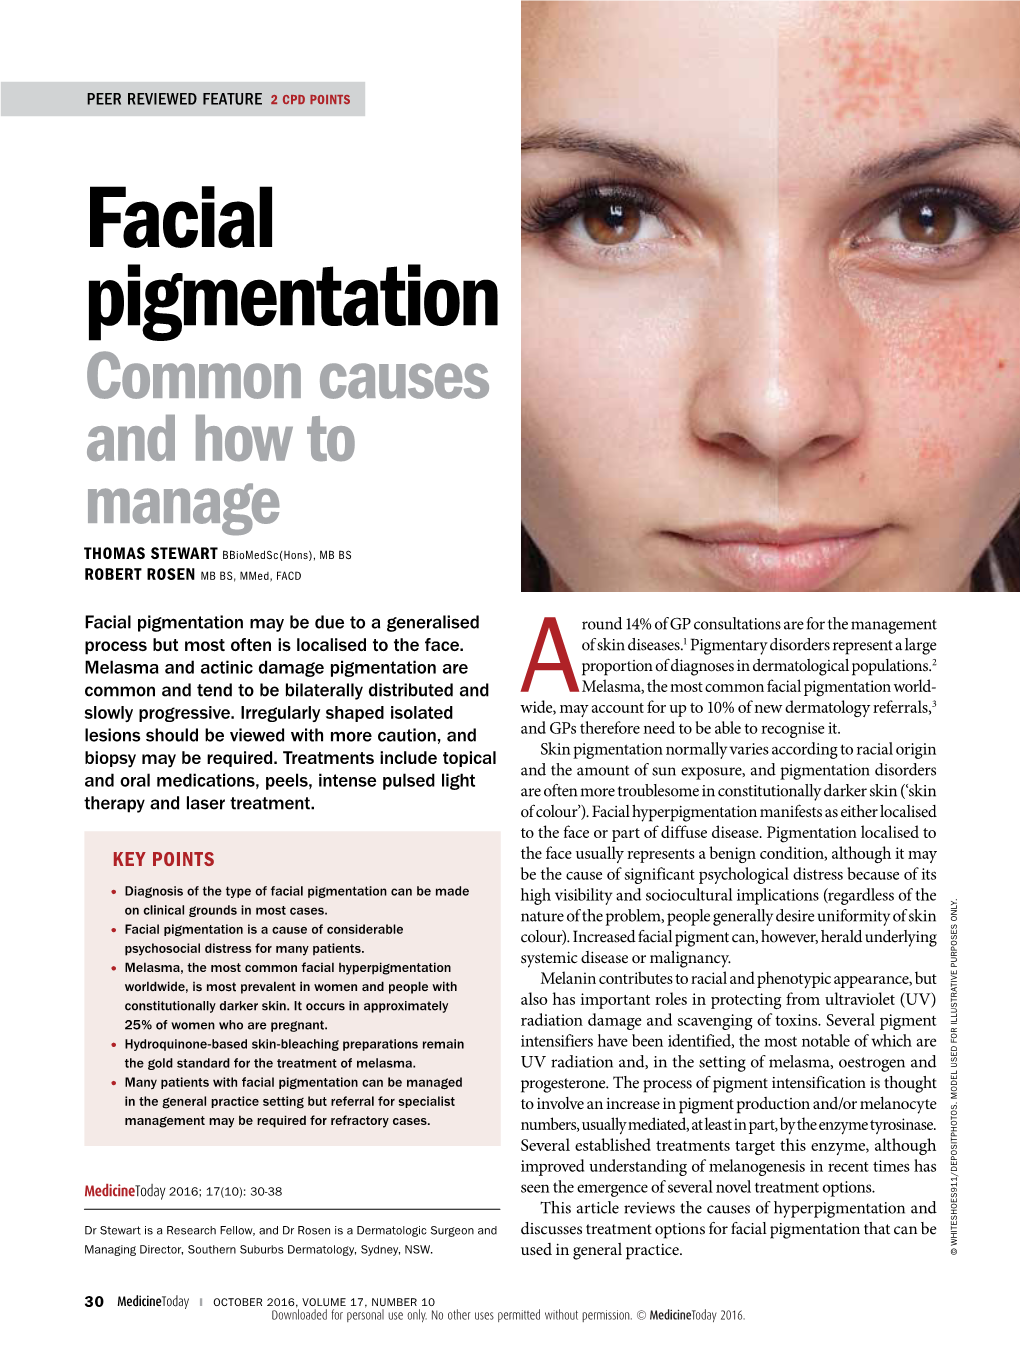 Facial Pigmentation Common Causes and How to Manage THOMAS STEWART Bbiomedsc(Hons), MB BS ROBERT ROSEN MB BS, Mmed, FACD